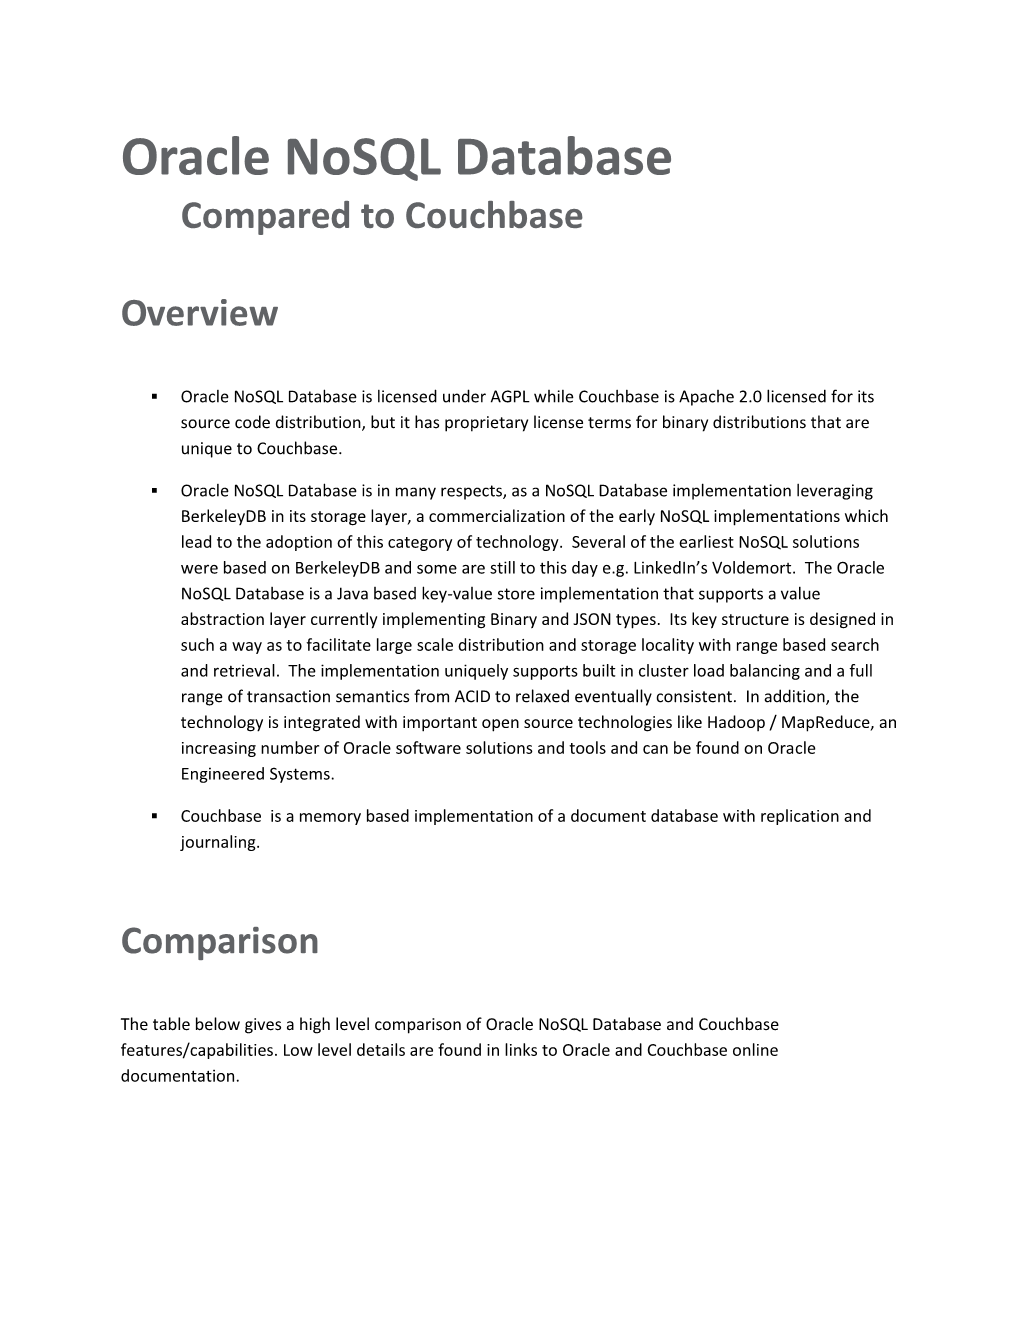 Oracle Nosql Database Compared to Couchbase